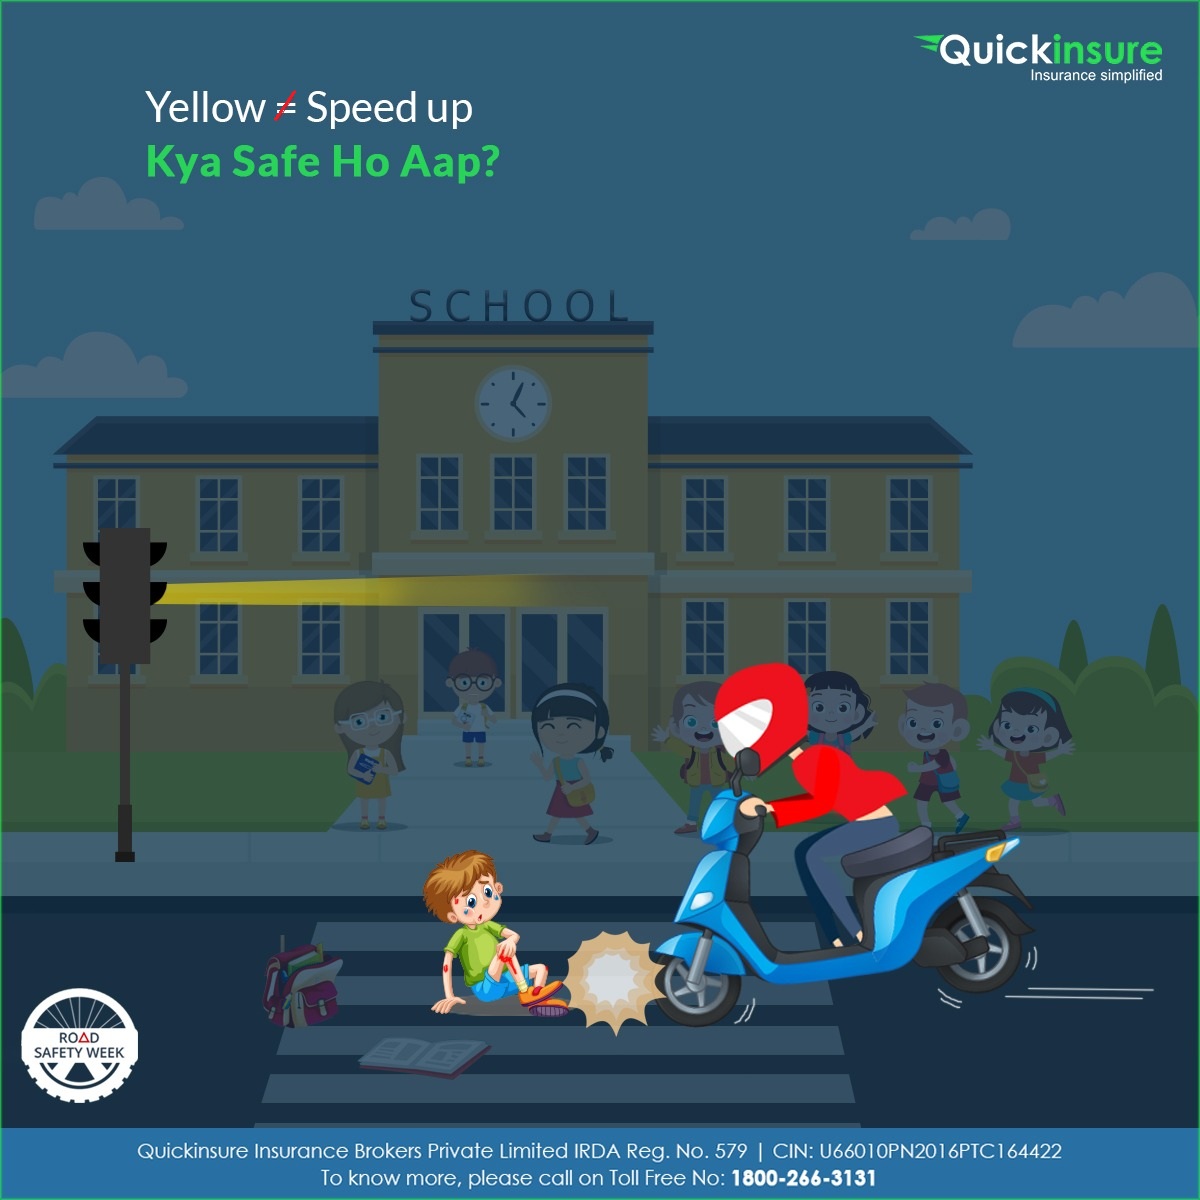 Yellow yellow dirty fellow,
keep Bike Speed 30km/h & Below.
Yellow light indicates to slow down.

Visit: quickinsure.co.in/two-wheeler-in…

#trafficlights #traficrules #RoadSafetyWeek #safety #Roadsafetyweek2020 #trafficruleawareness
#accident #Insurance #InsuranceSimplified #Quickinsure